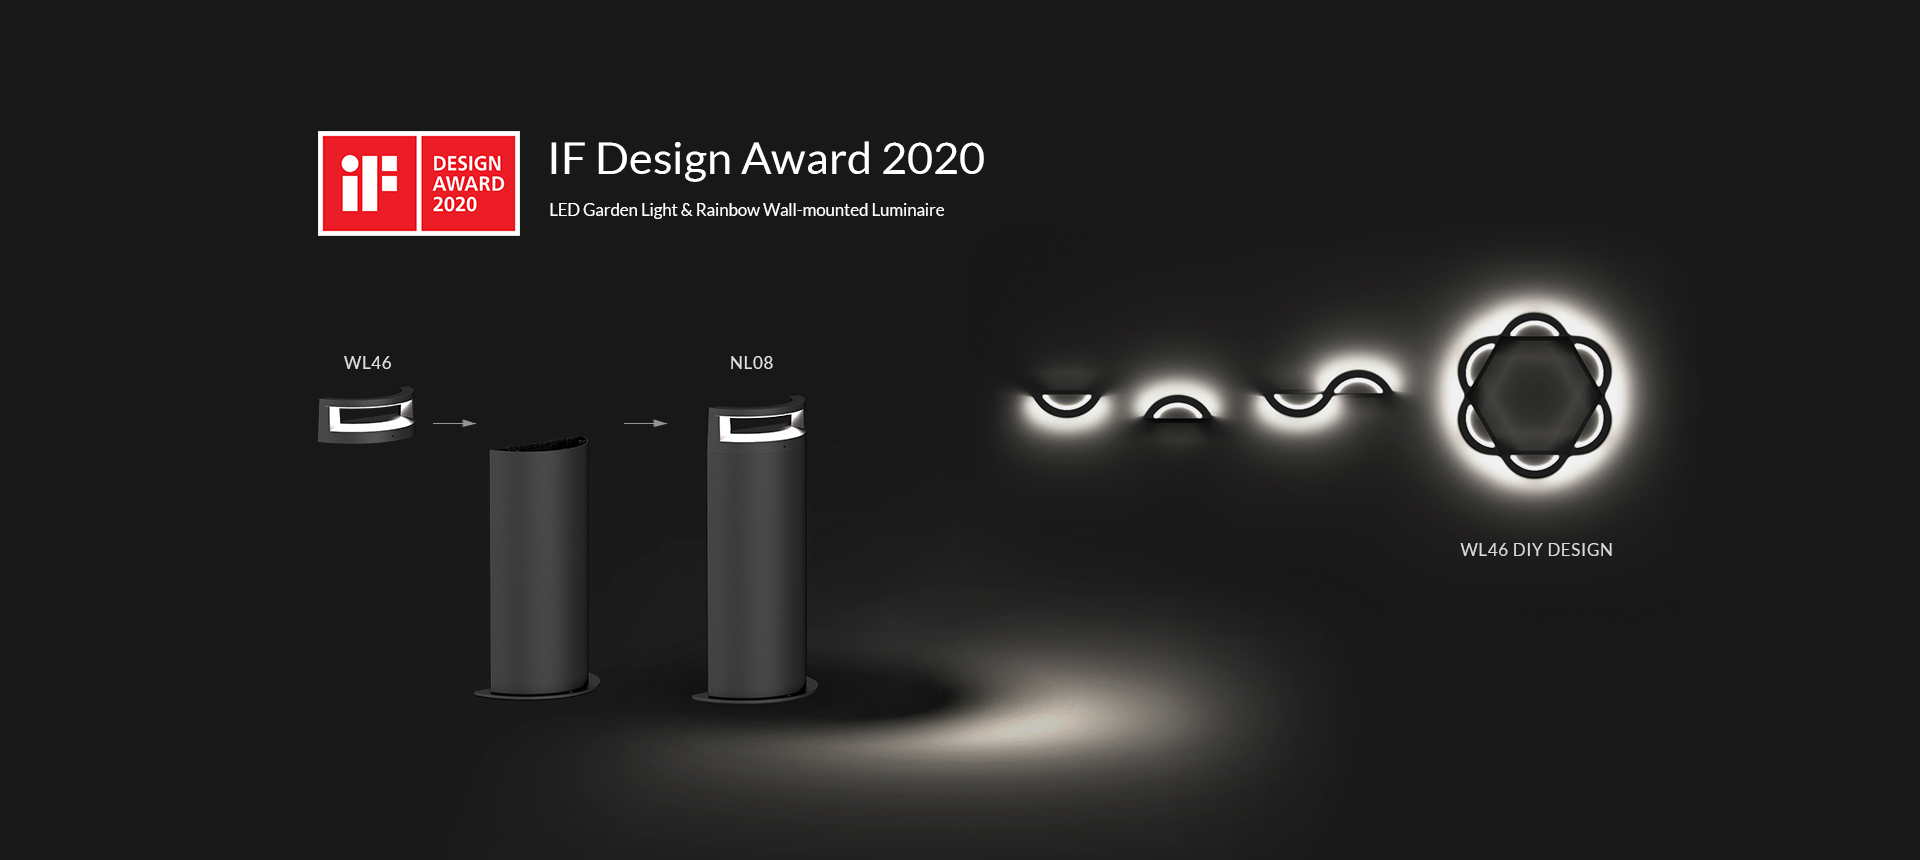 UP-SHINE STAR PRODUCTS WIN IF PRODUCT DESIGN AWARD